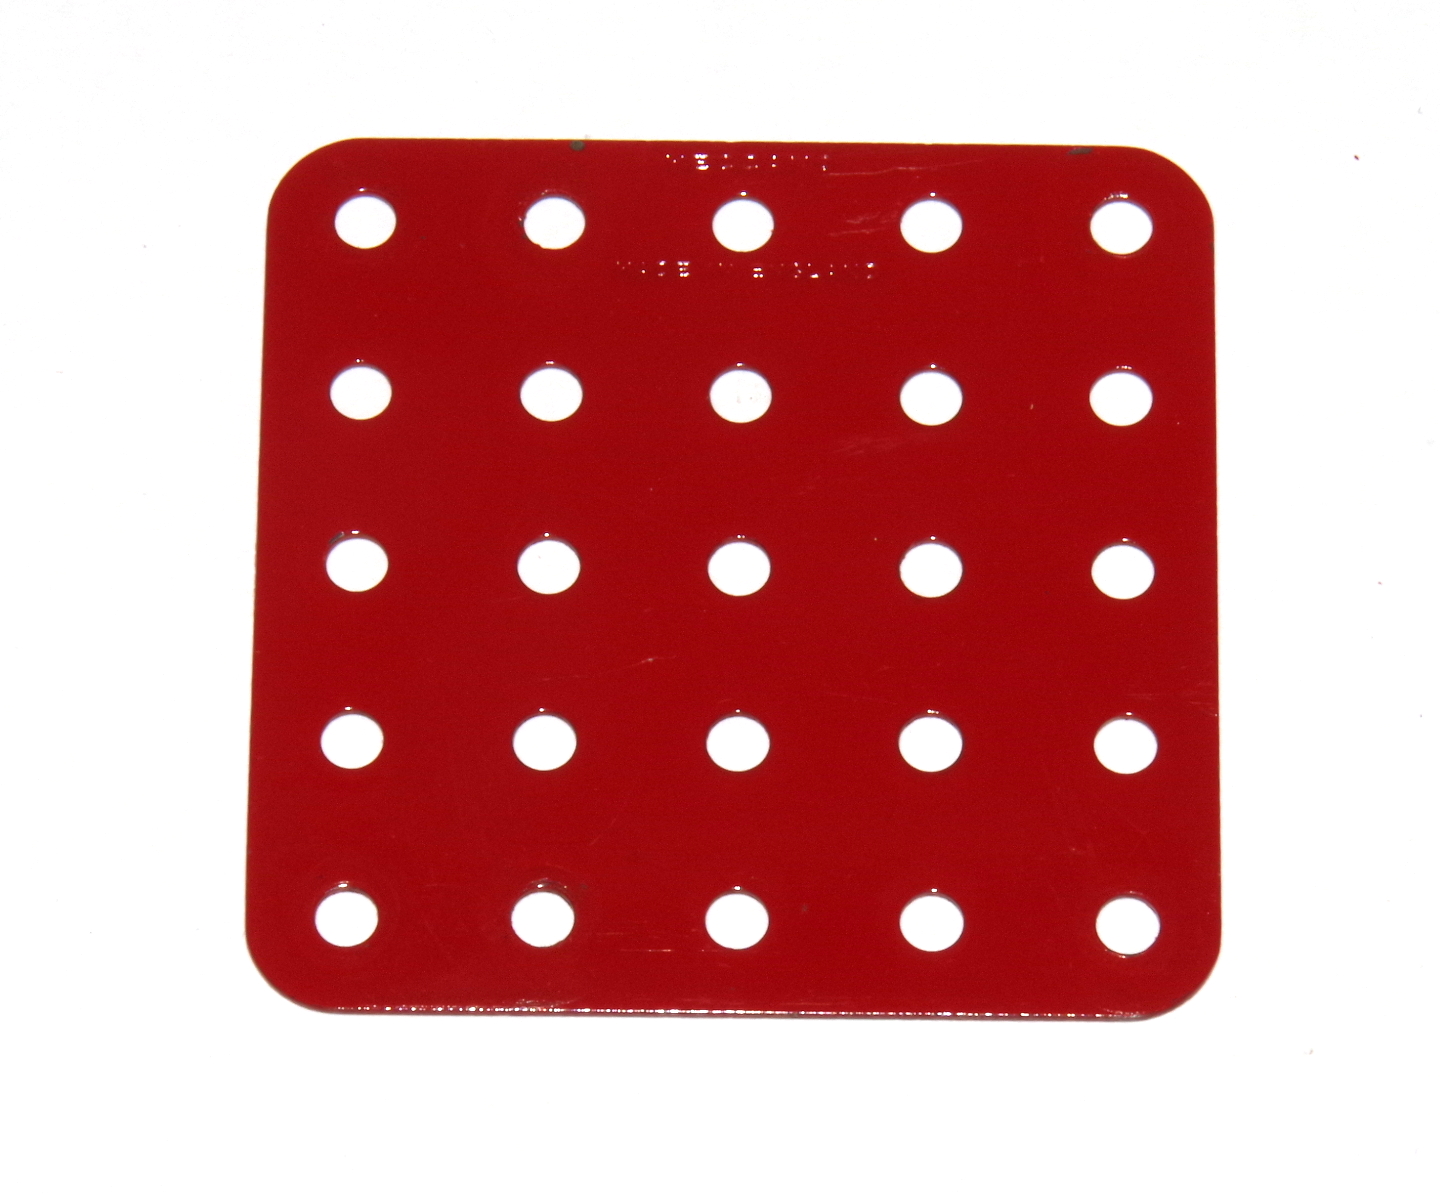 72 Flat Plate 5x5 Hole Mid Red Repainted